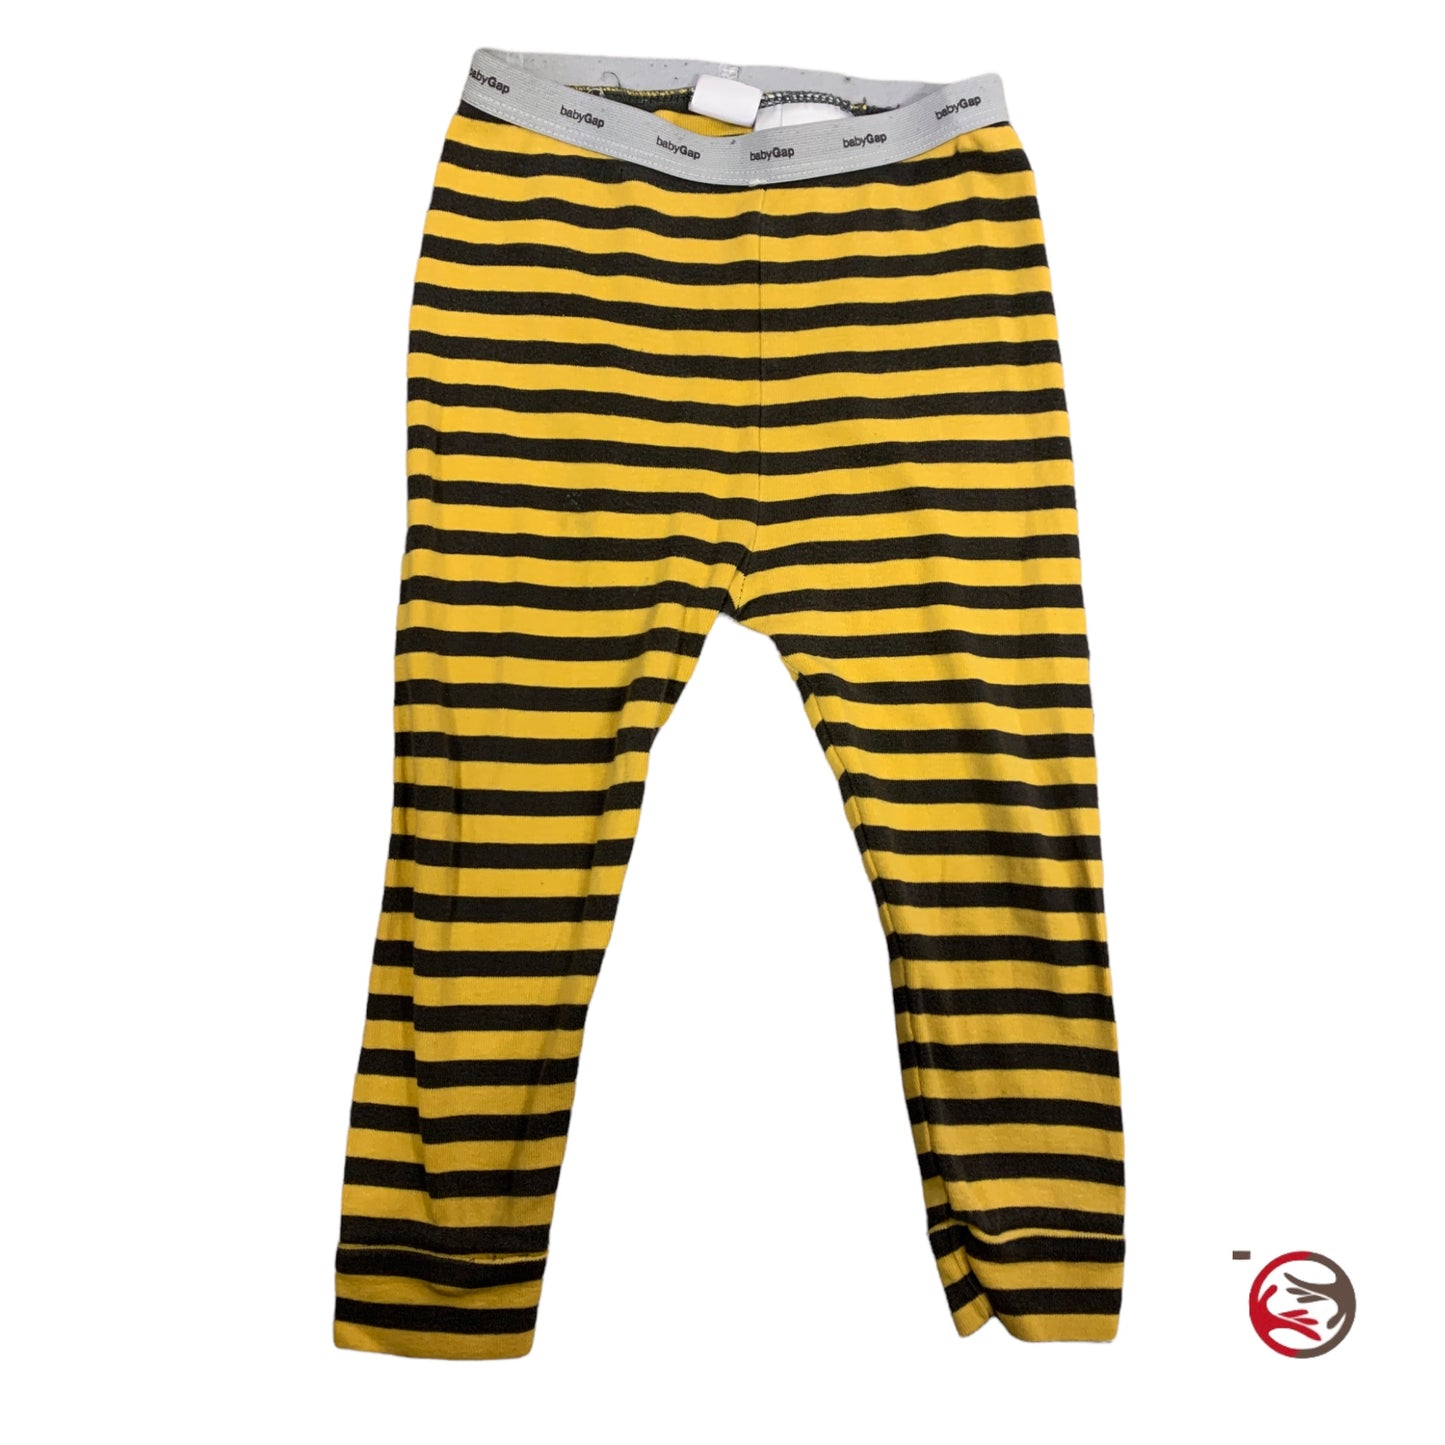 Babygap striped trousers for boys 18-24 months